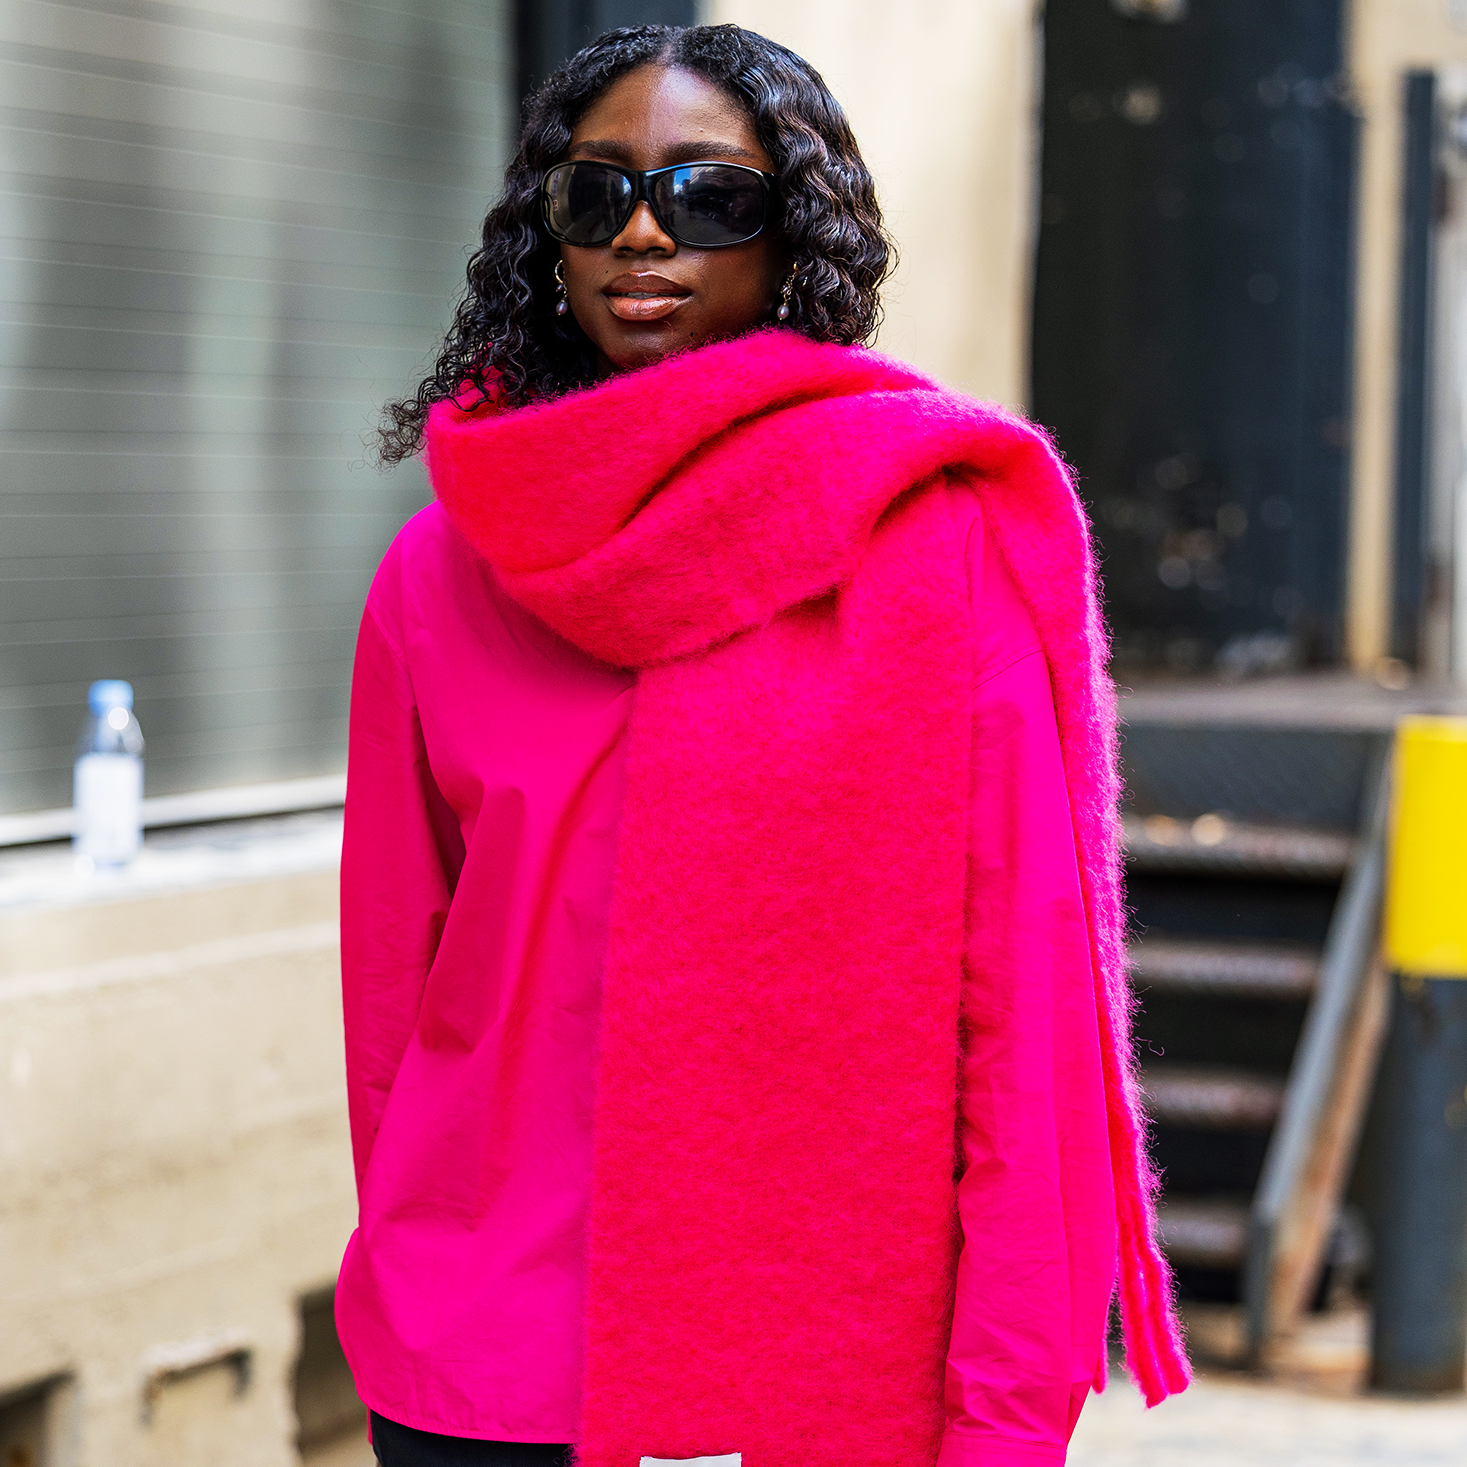 30 Cute Winter Outfits That'll Make You WANT to Step Out Into the Cold